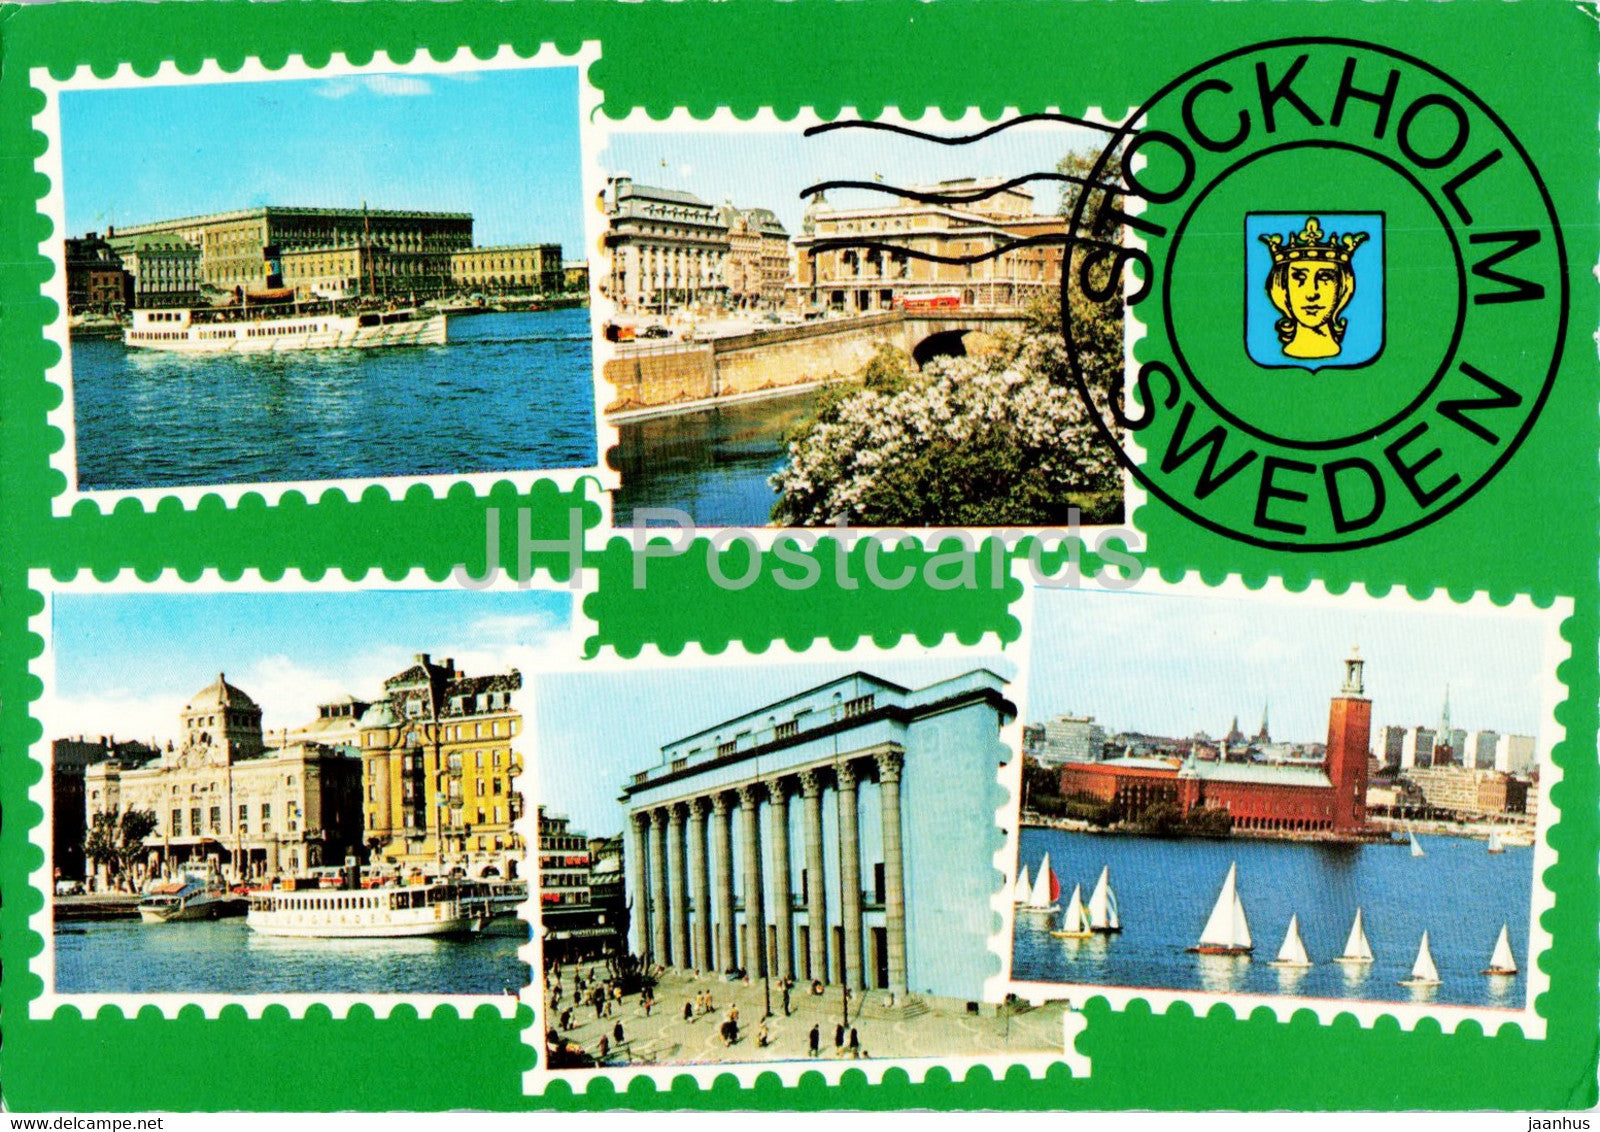 Stockholm - City views - multiview - 1971 - Sweden - used - JH Postcards